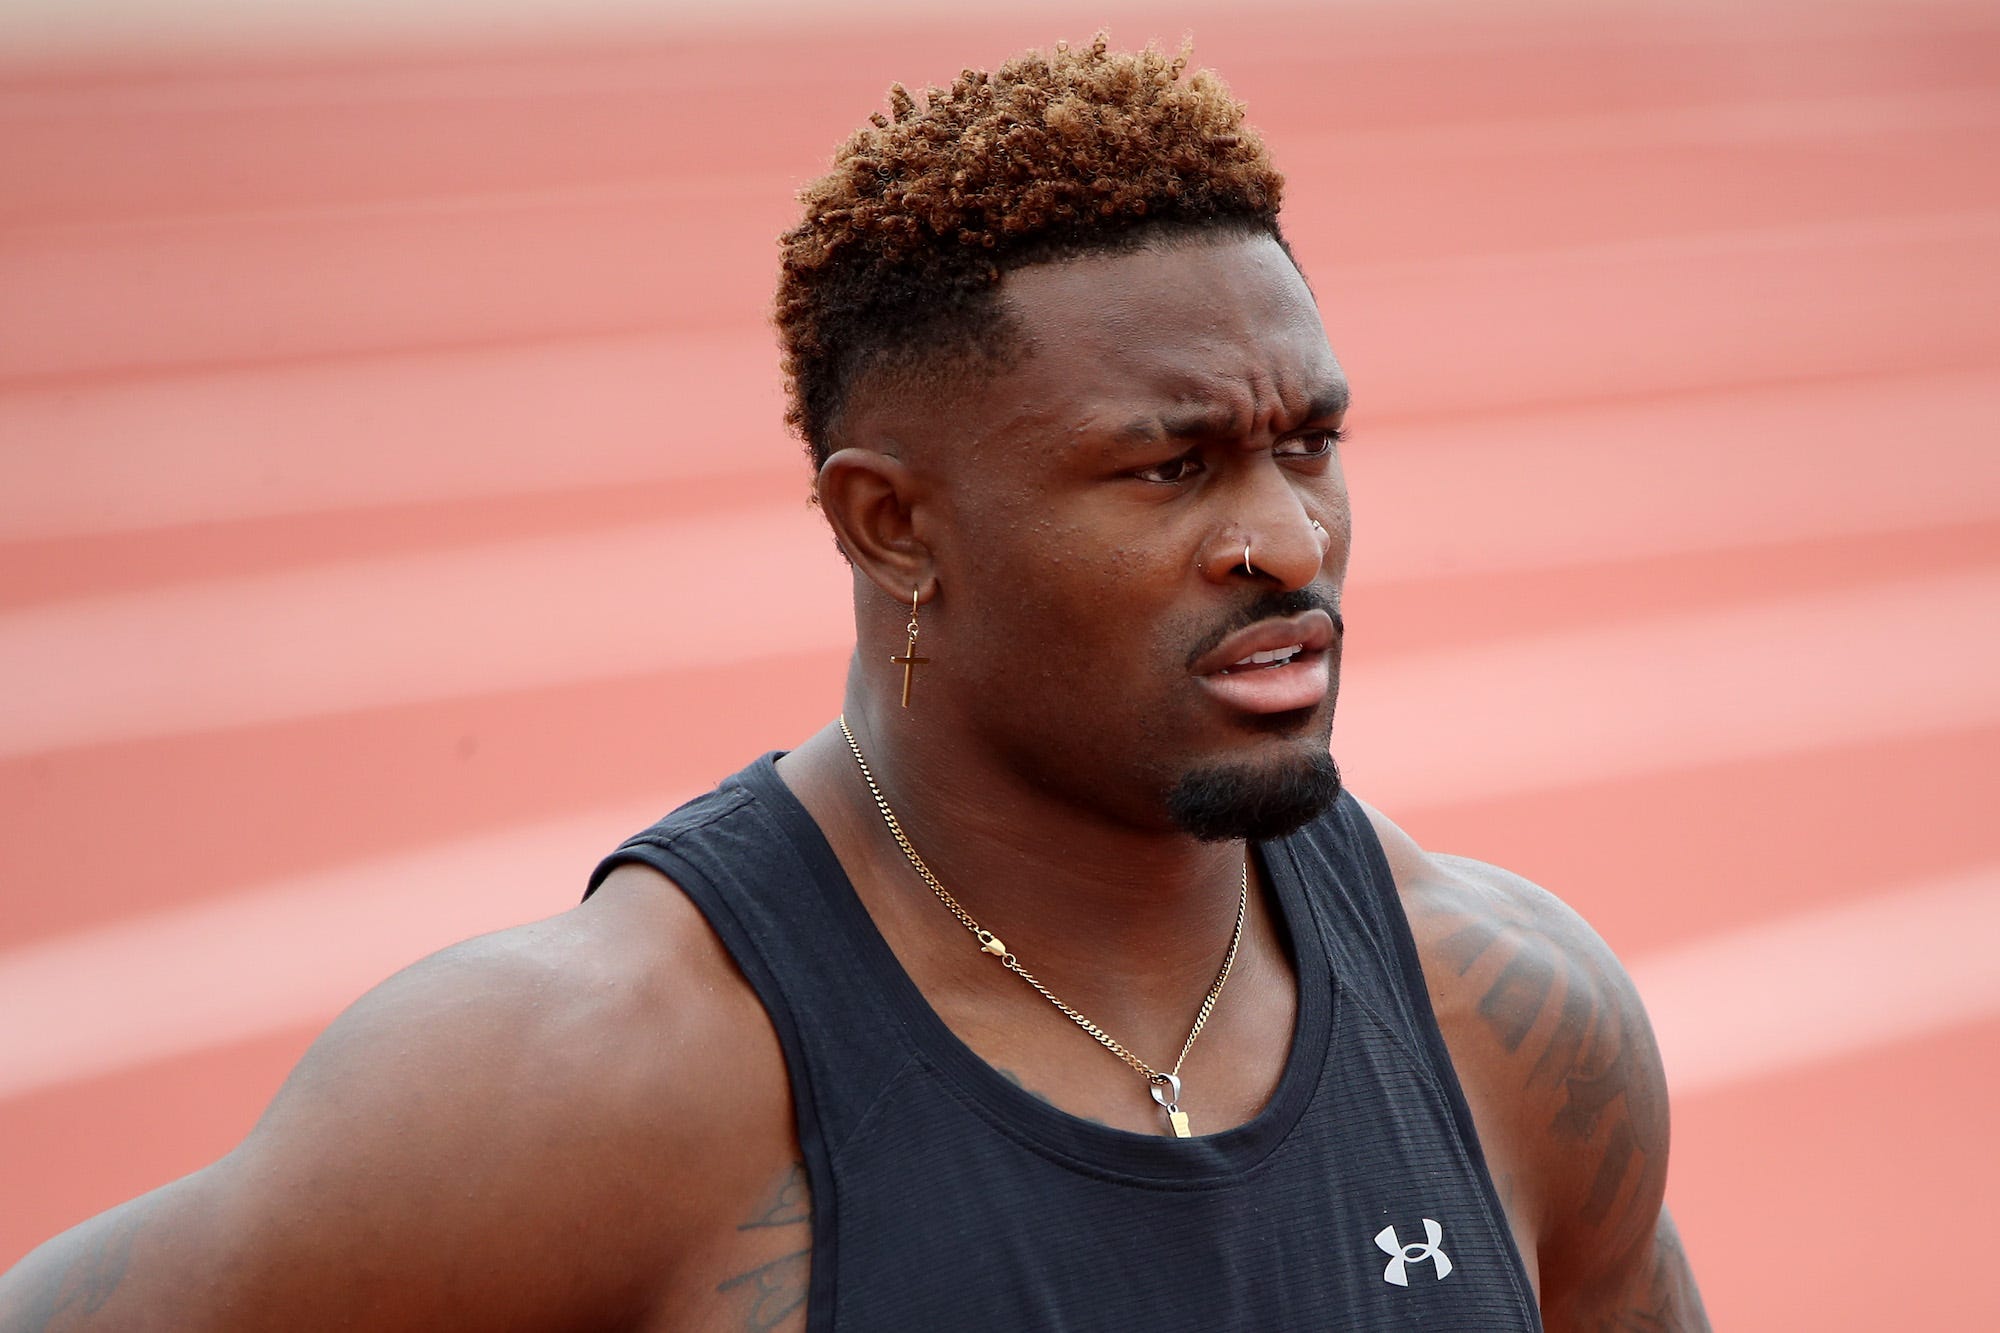 DK Metcalf could really qualify for the 100M Olympic Trials